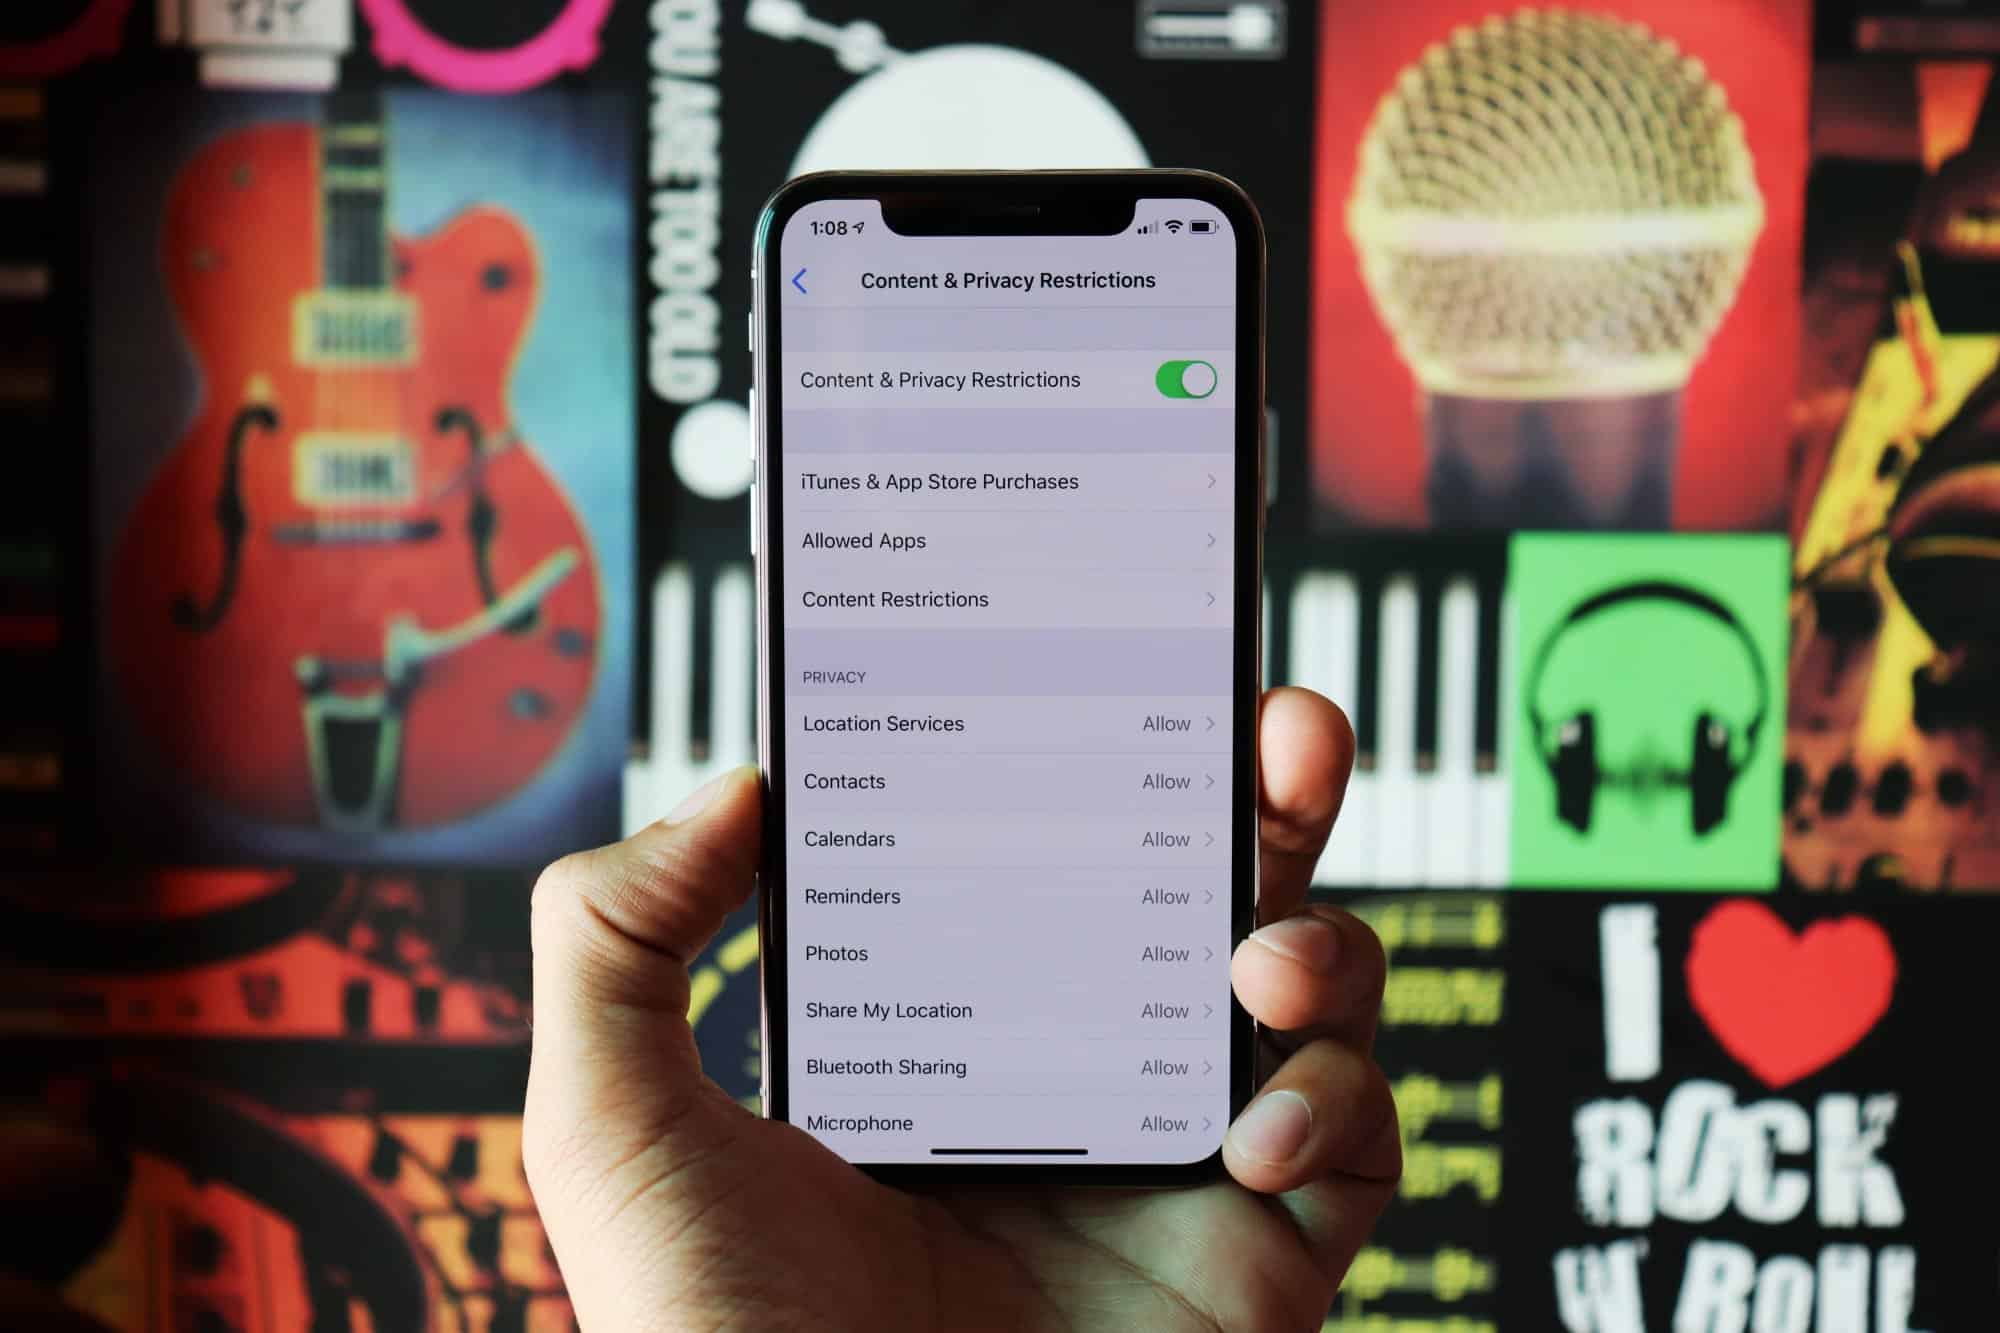 How to Use Content & Privacy Restrictions in iOS 12